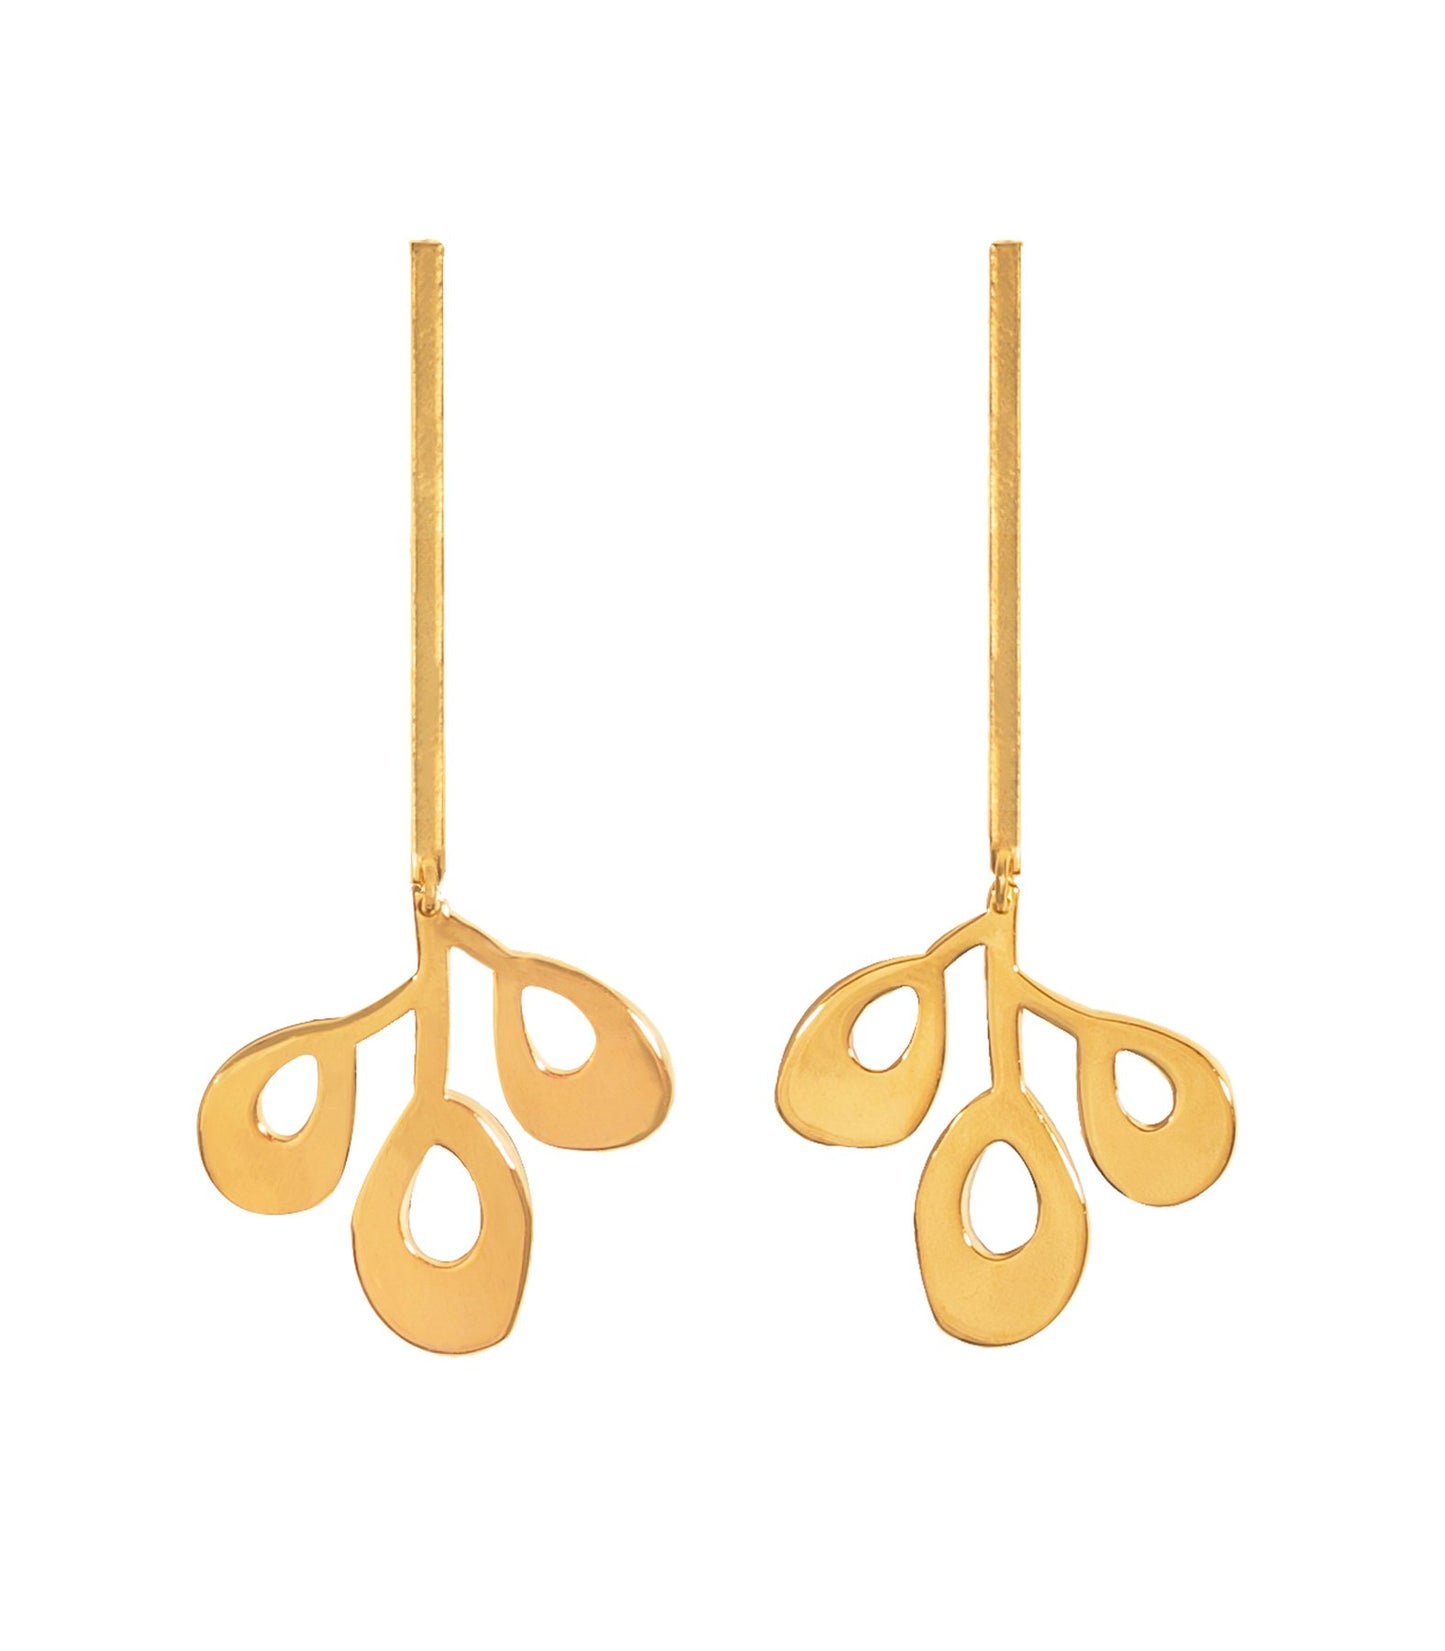 HOLLY EARRINGS - Osadia Concept Store